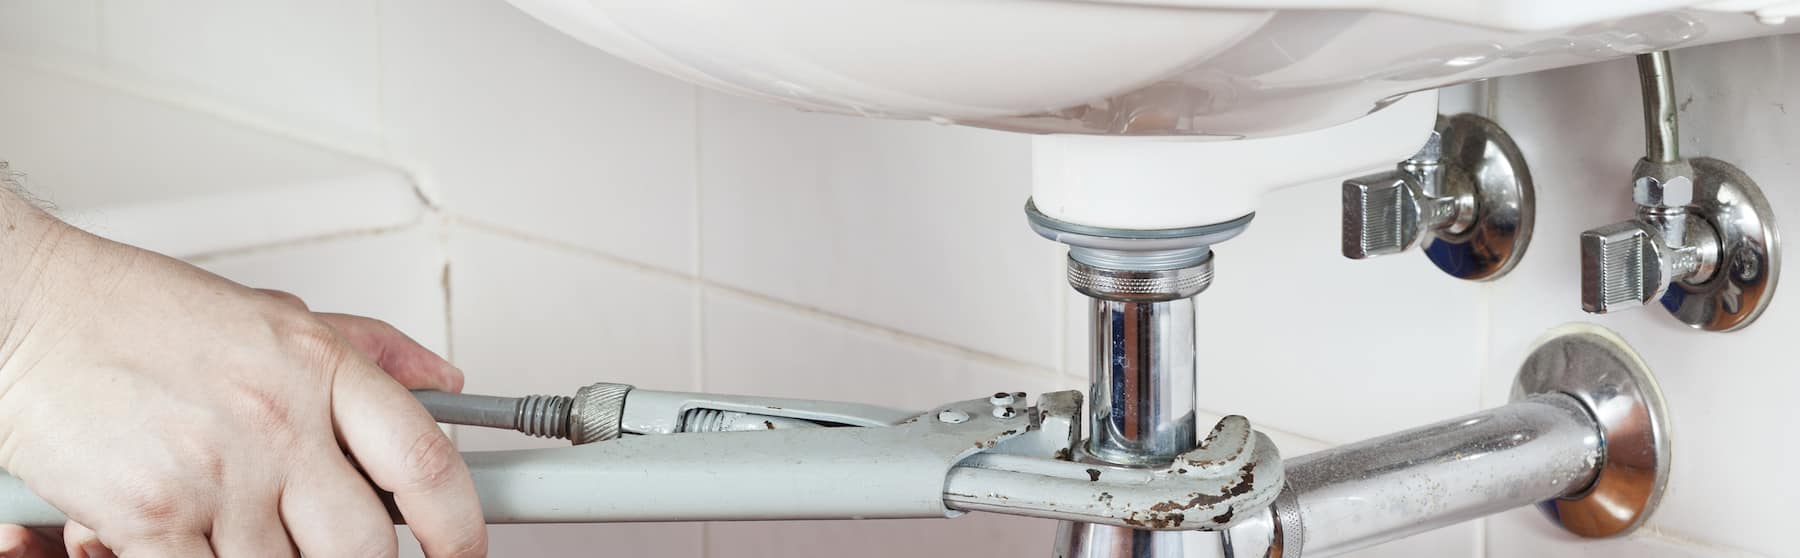 Tightening the screws of the sink drain